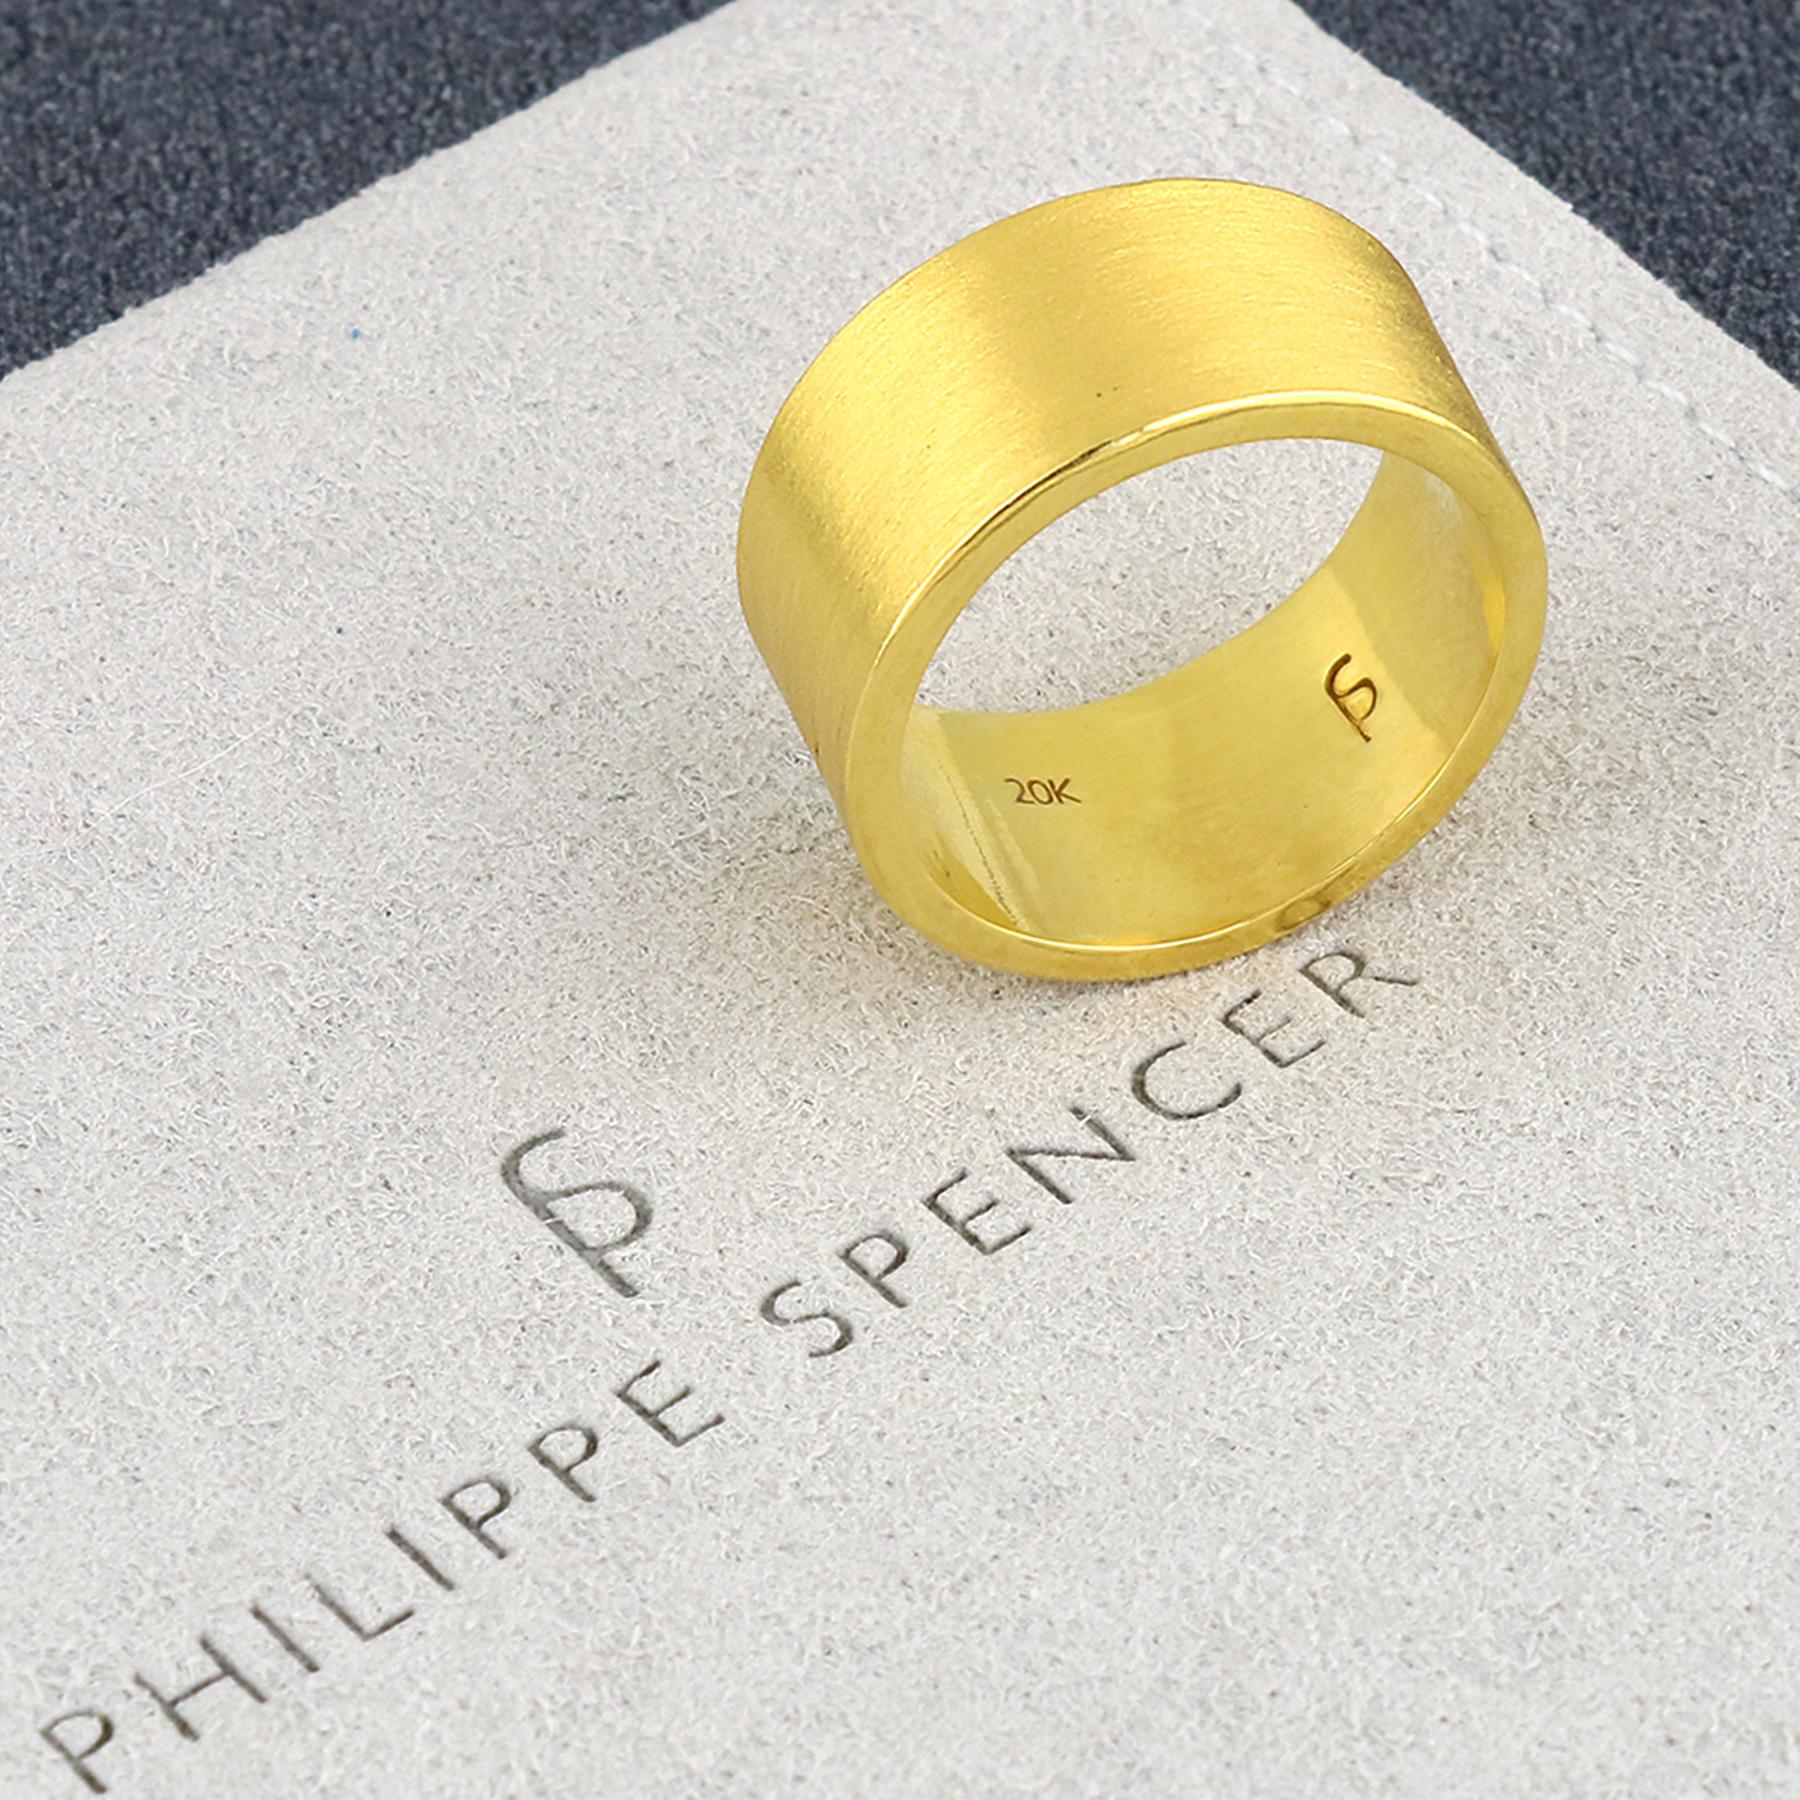 PHILIPPE-SPENCER - 10 X 1.5mm Solid 20K Gold Hand-Forged Statement Band. Heavy Matte Exterior, Mirror Polished Interior.  Each is a unique one-of-a-kind work of art. This PHILIPPE SPENCER solid 20K Gold Hand Made band is extremely popular with both